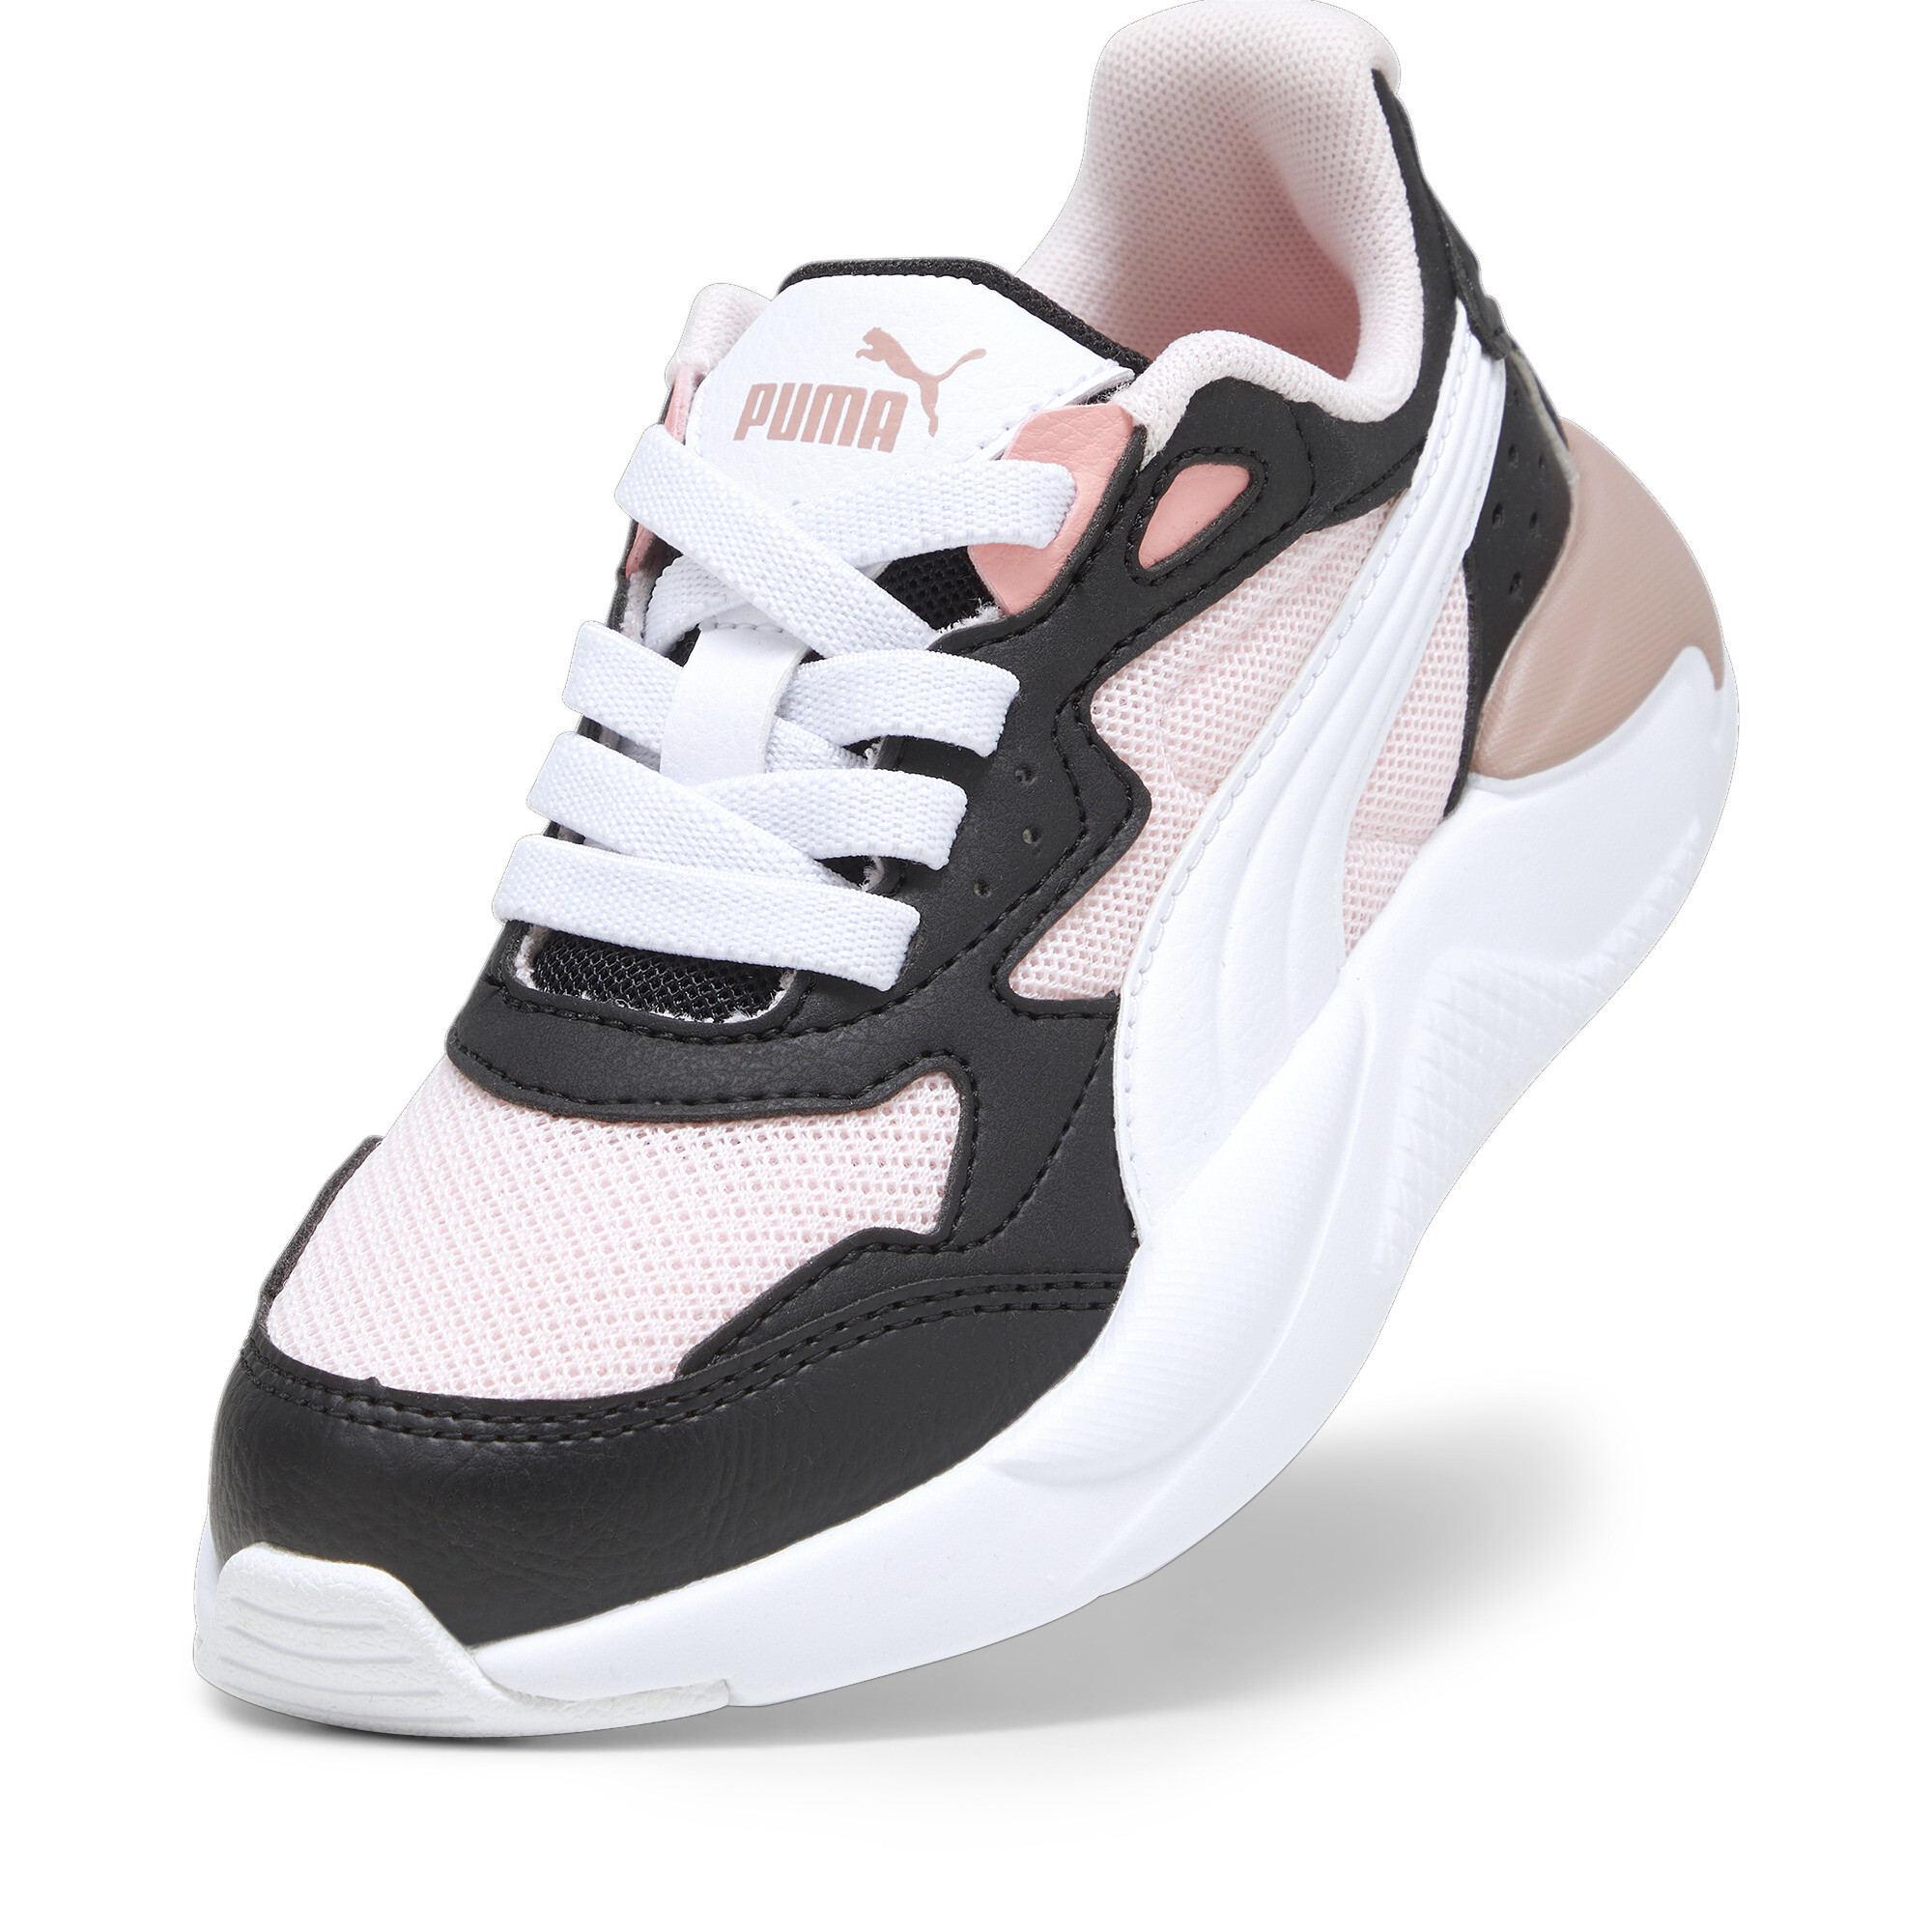 Puma X-Ray Speed AC Kids' Trainers, Pink, Size 34, Shoes